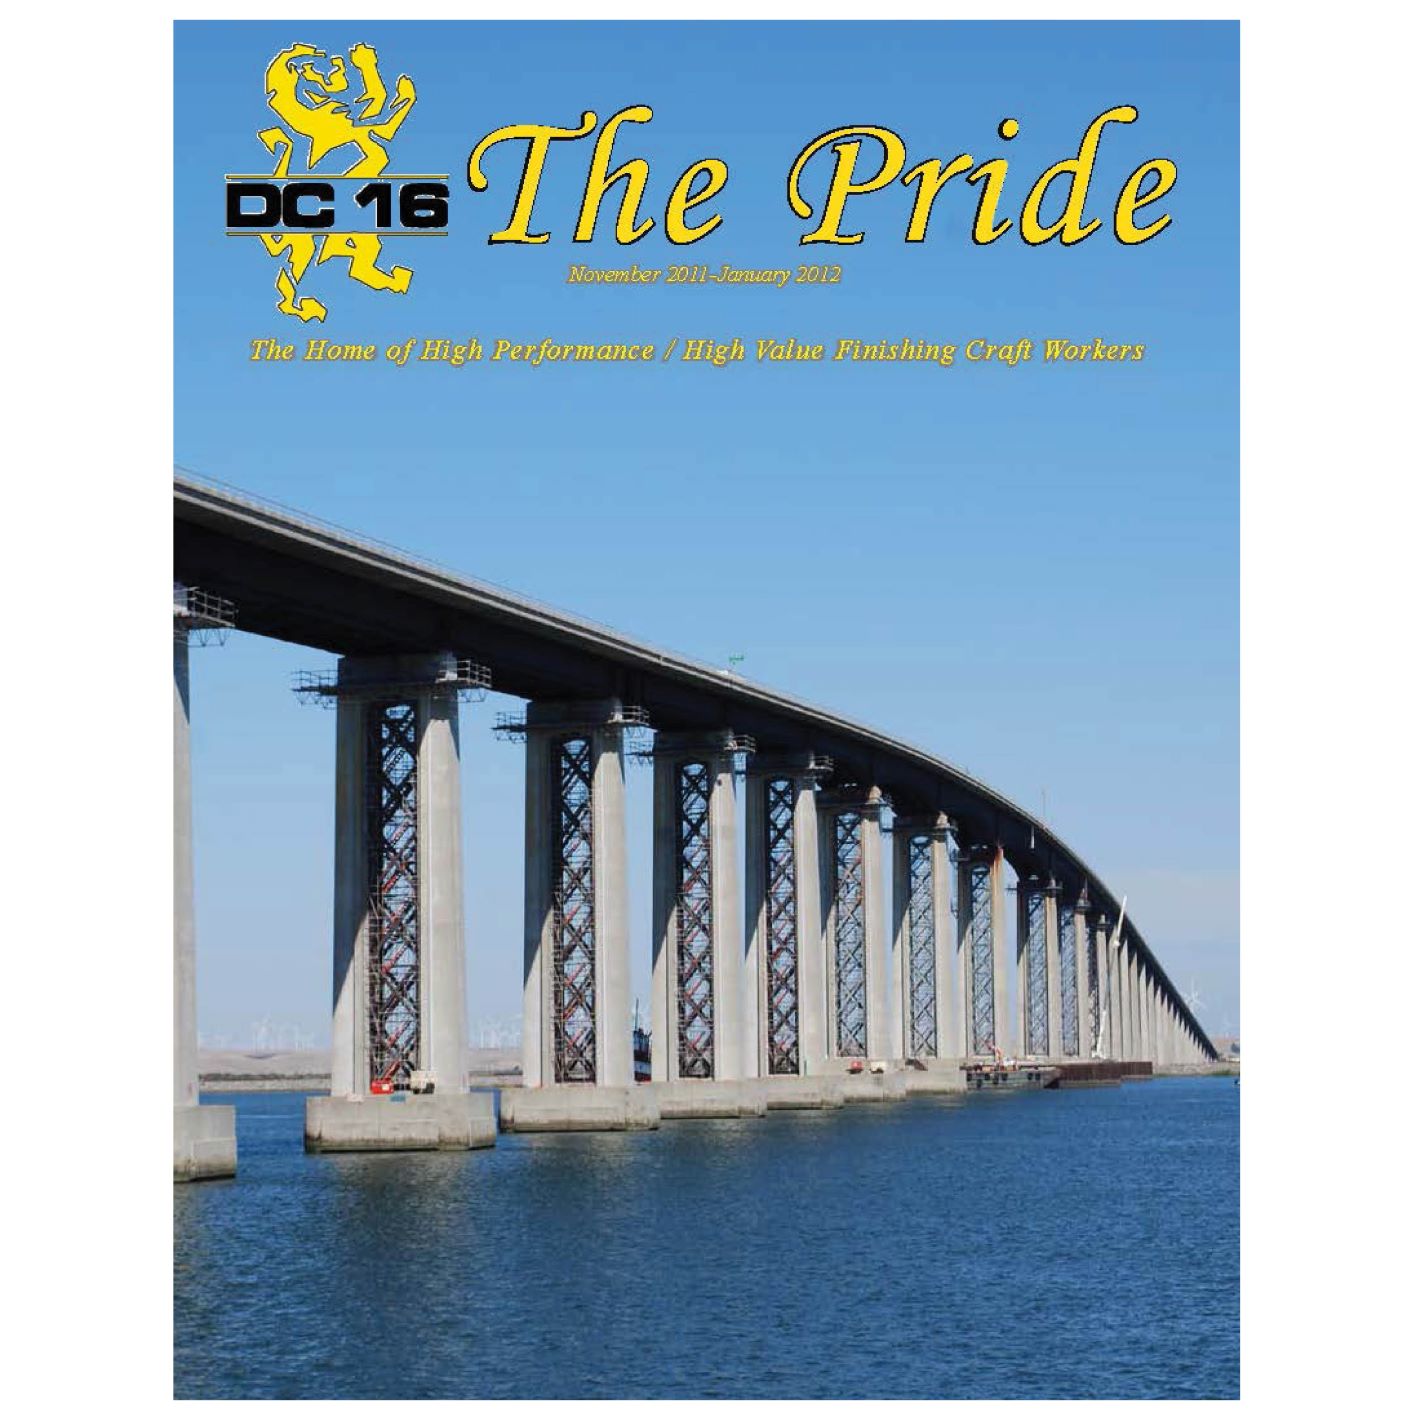 Image from the Gallery: The Pride November 2011 – January 2012